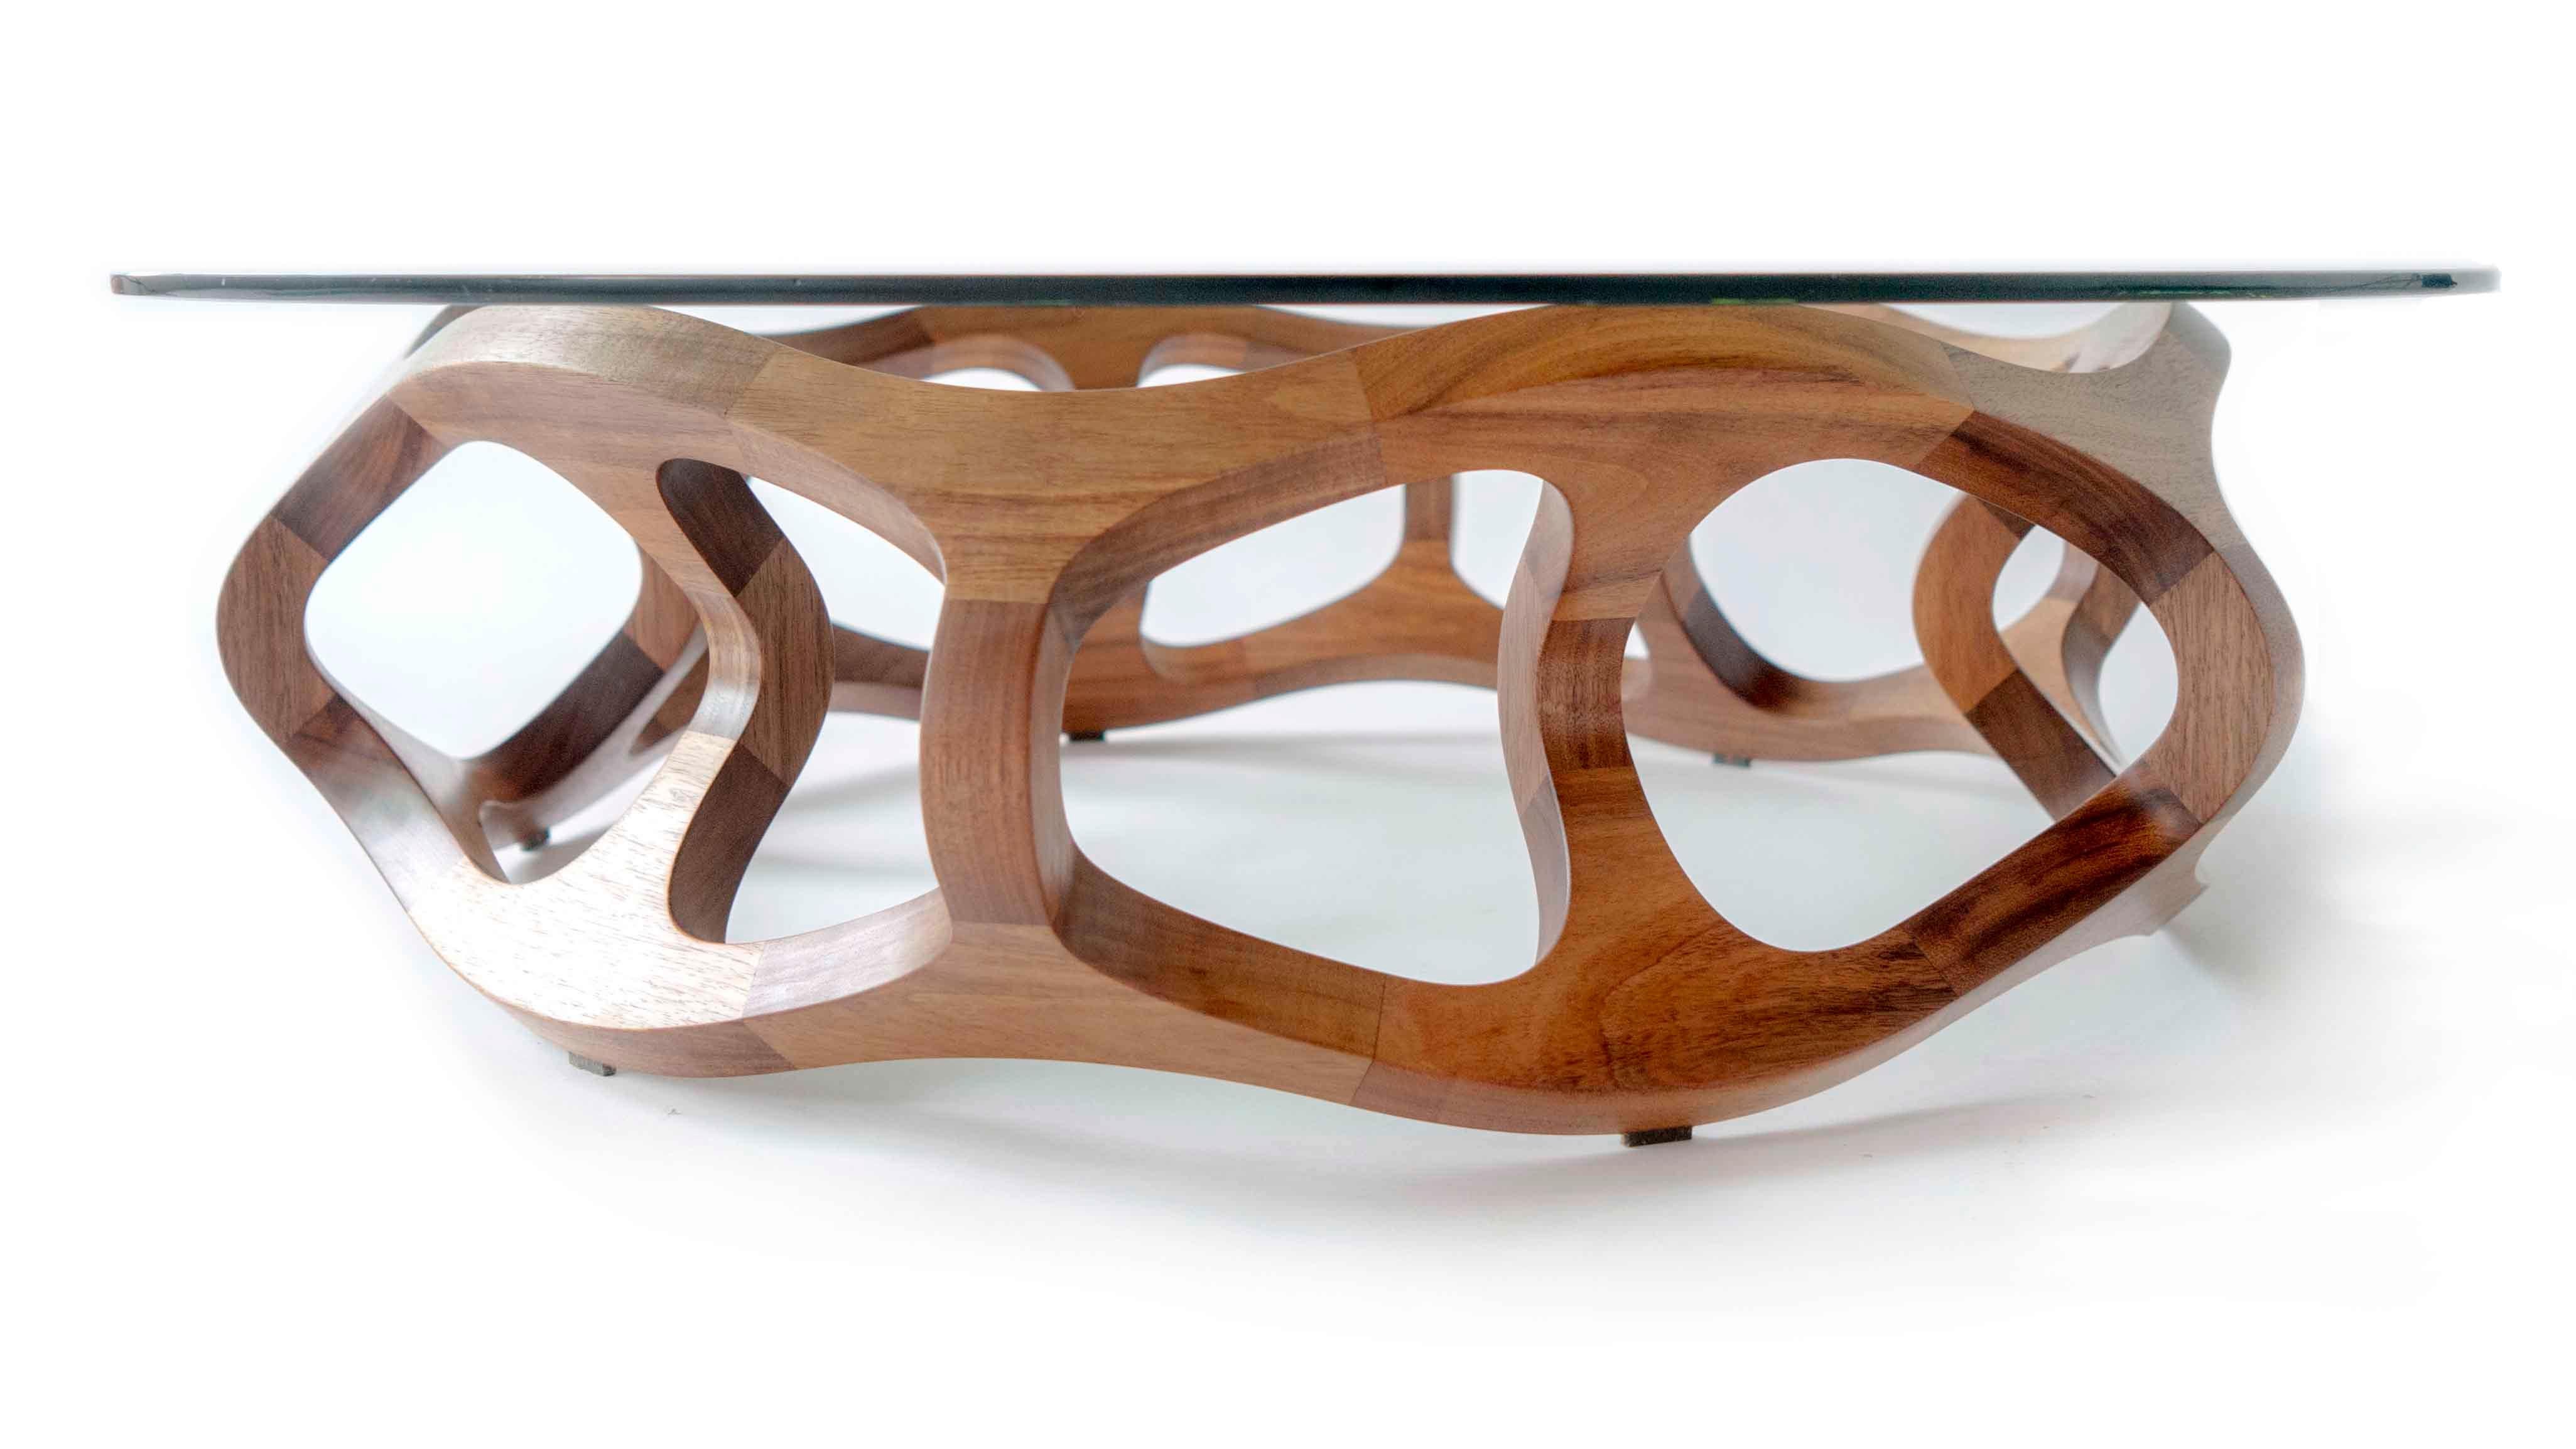 Poplar Toro G6, Geometric Sculptural Center Table Made of Solid Wood by Pedro Cerisola For Sale